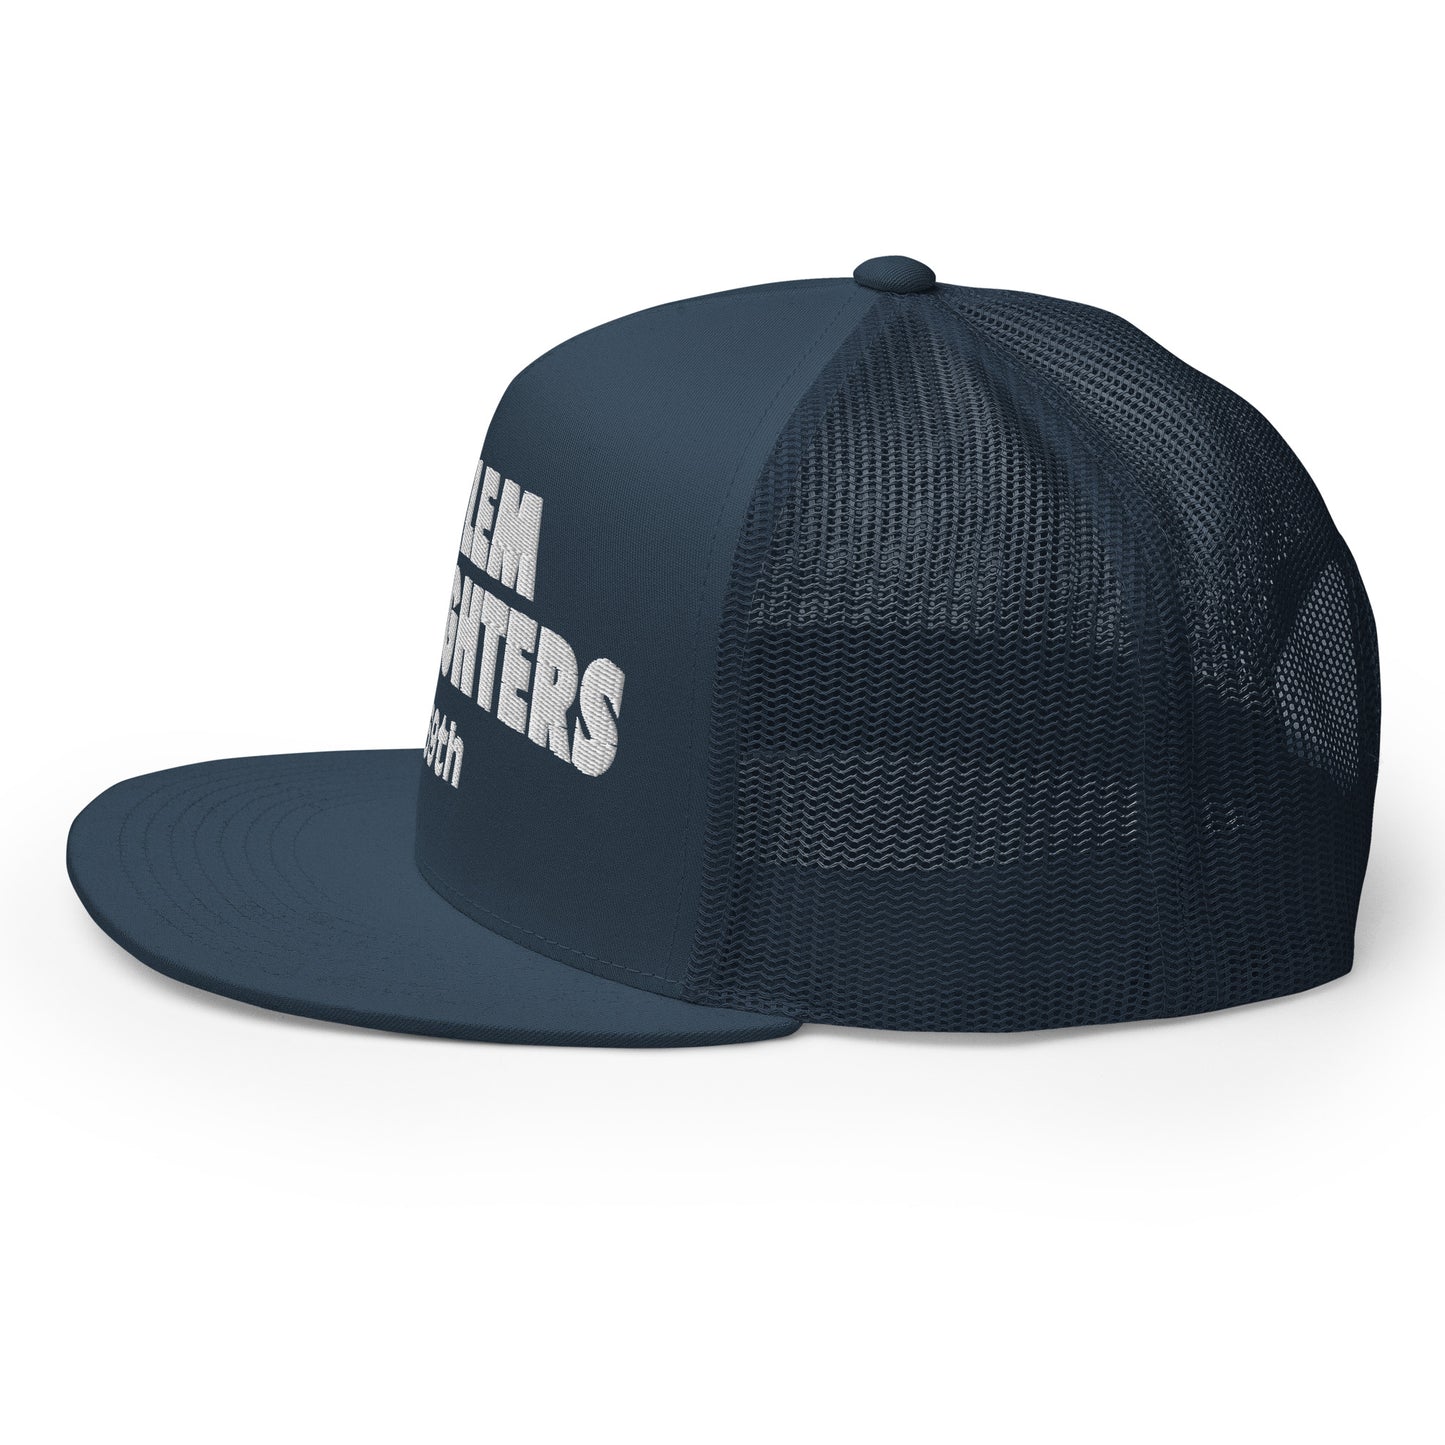 navy trucker hat with harlem hellfighters 369th embroidery